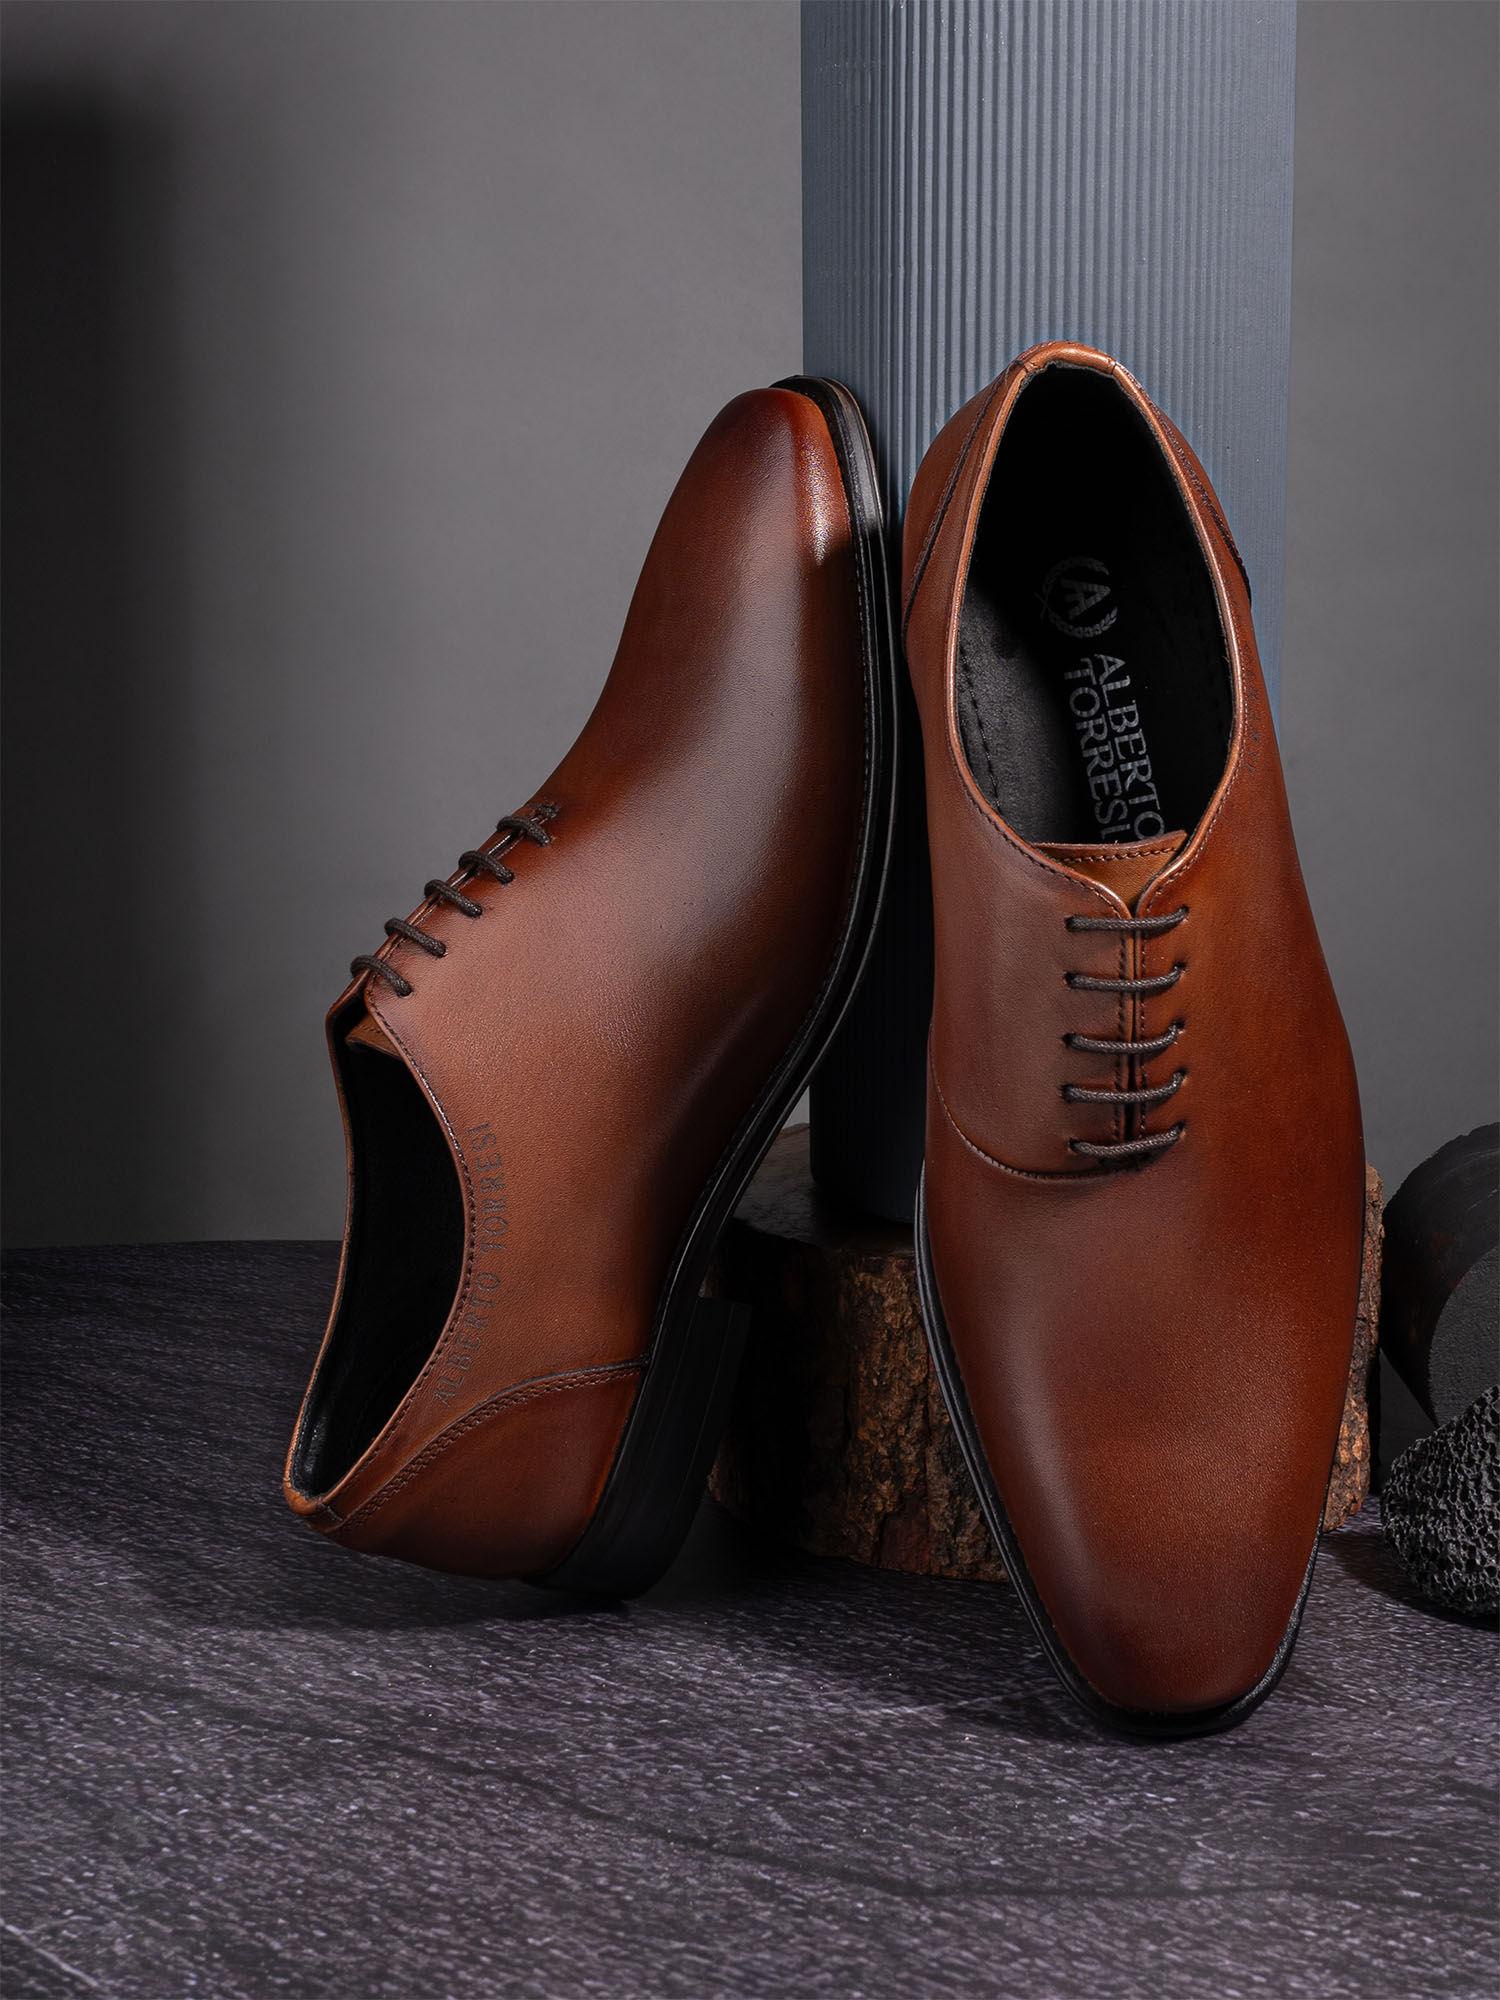 solid tan leather lace up shoes